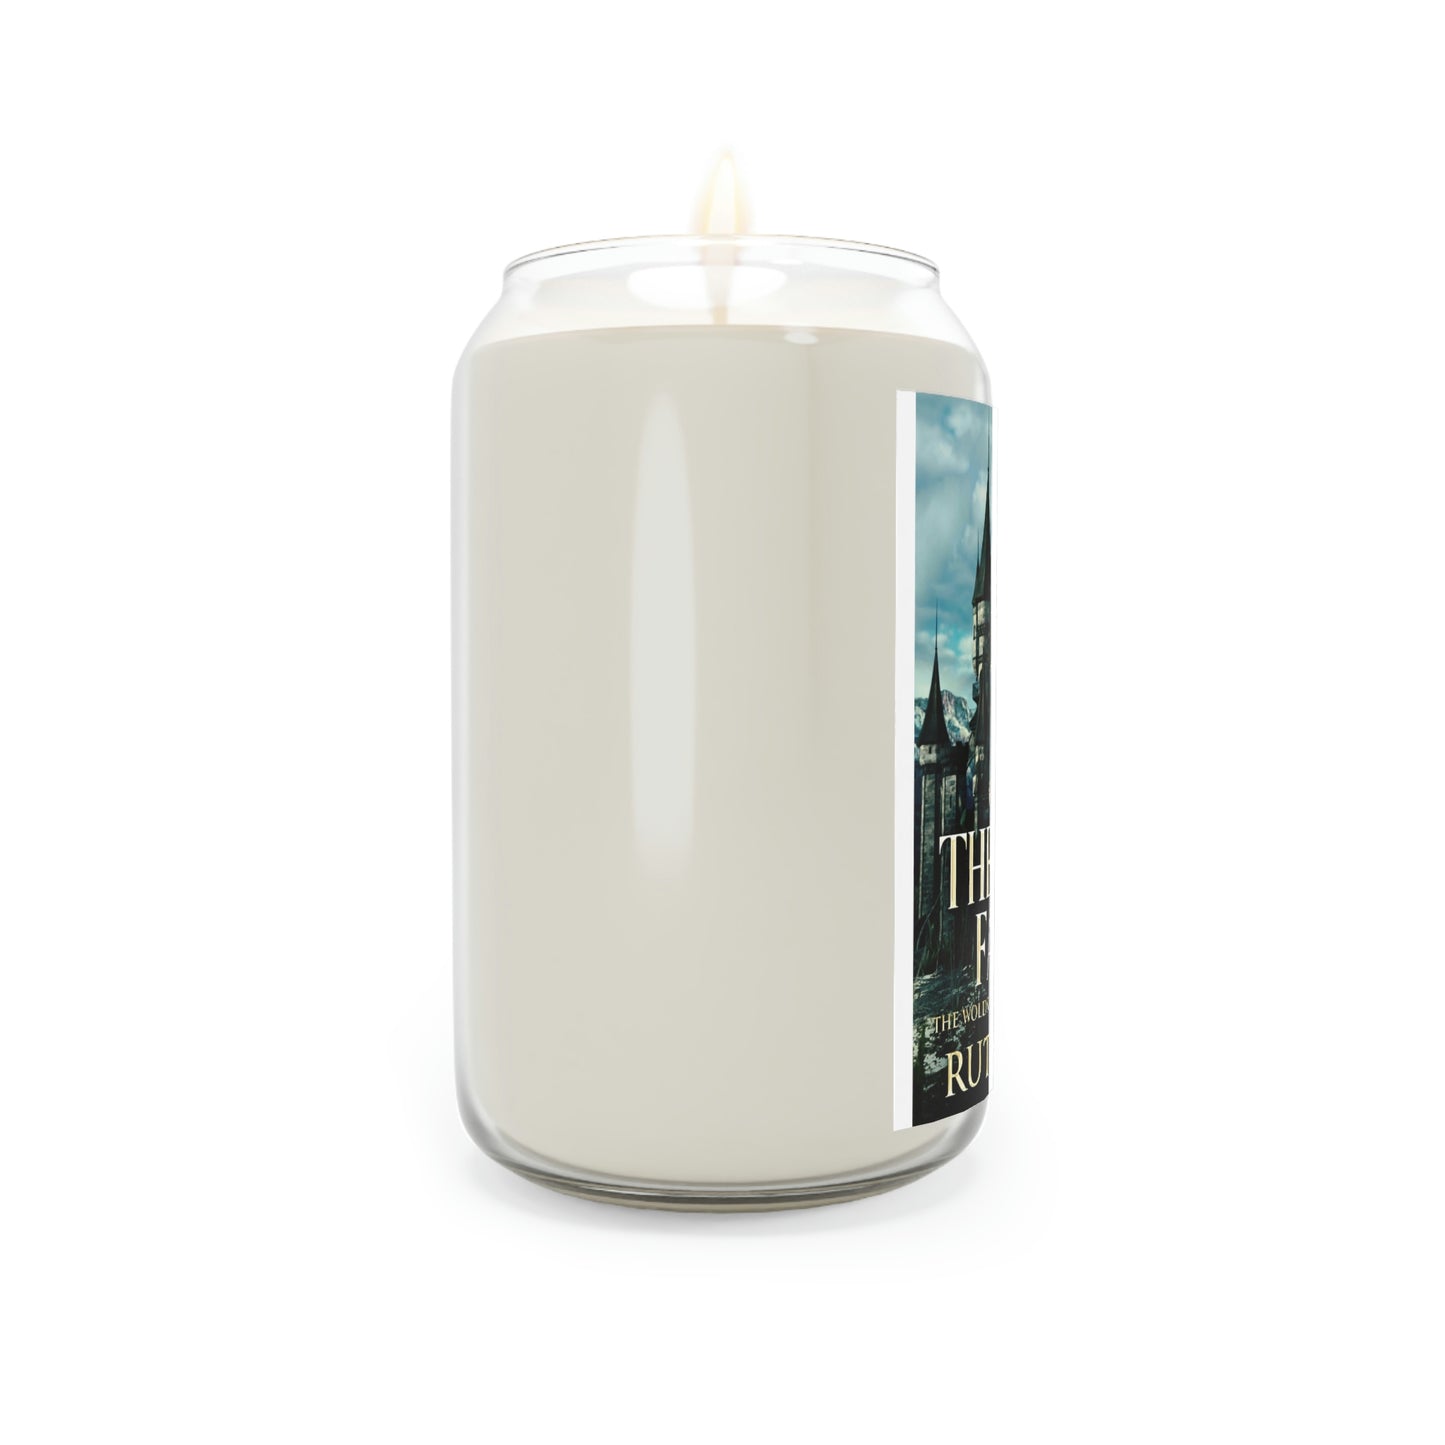 The Deadly Favour - Scented Candle